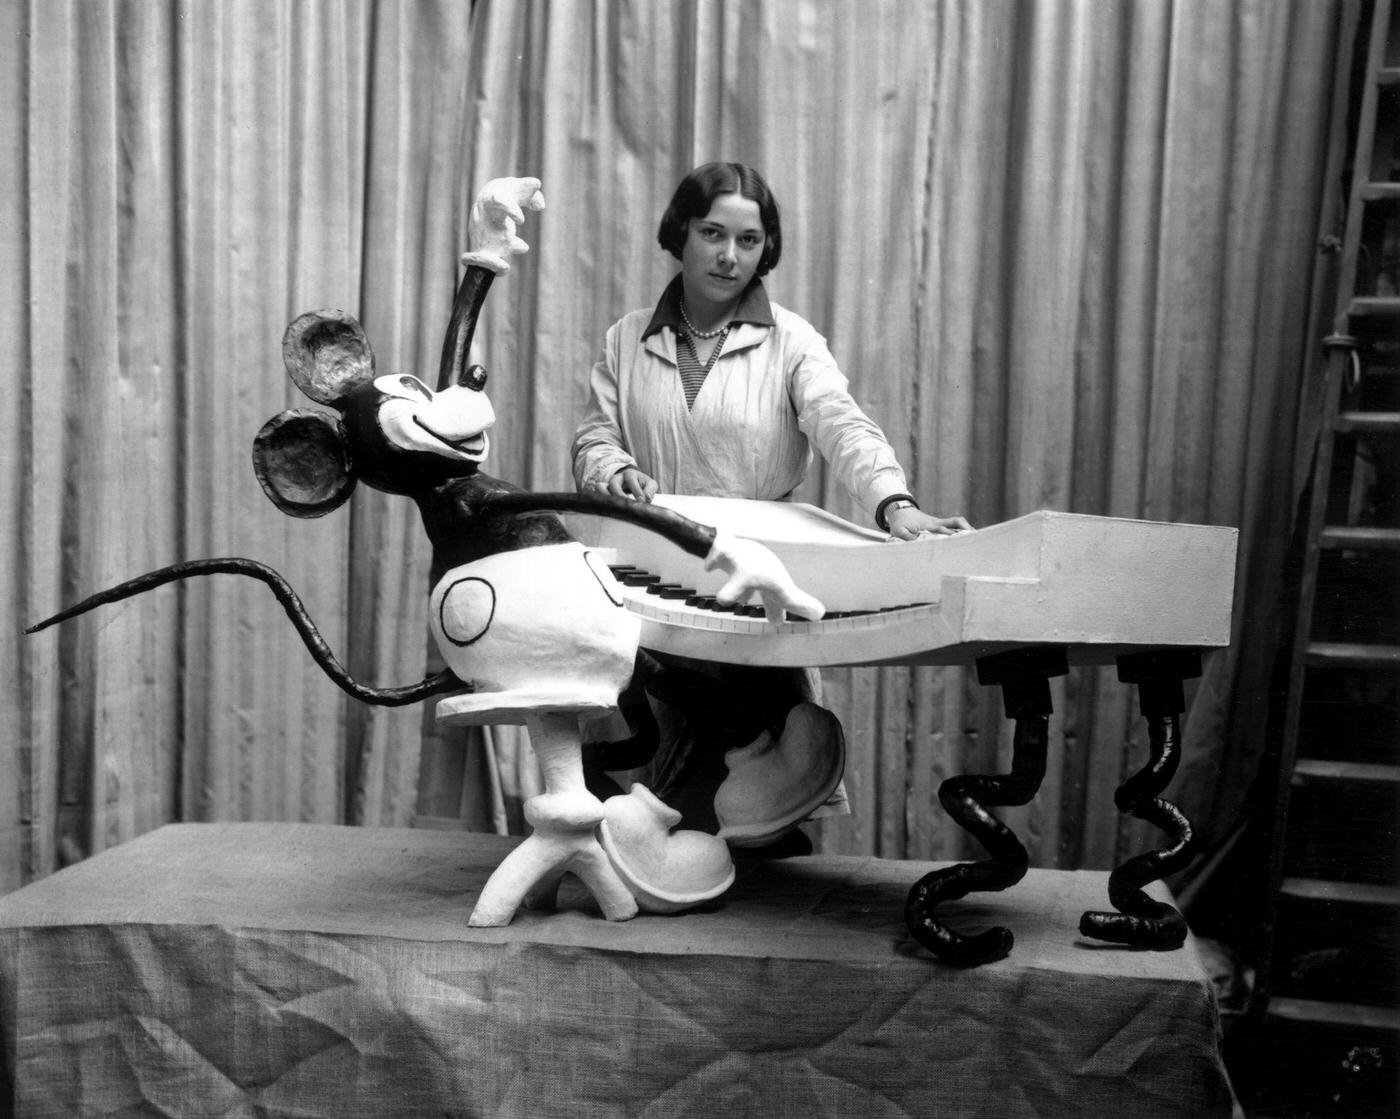 An employee at Madame Tussaud's waxworks museum on Marylebone Road, London, putting the finishing touches to a waxwork of Mickey Mouse at the keyboard